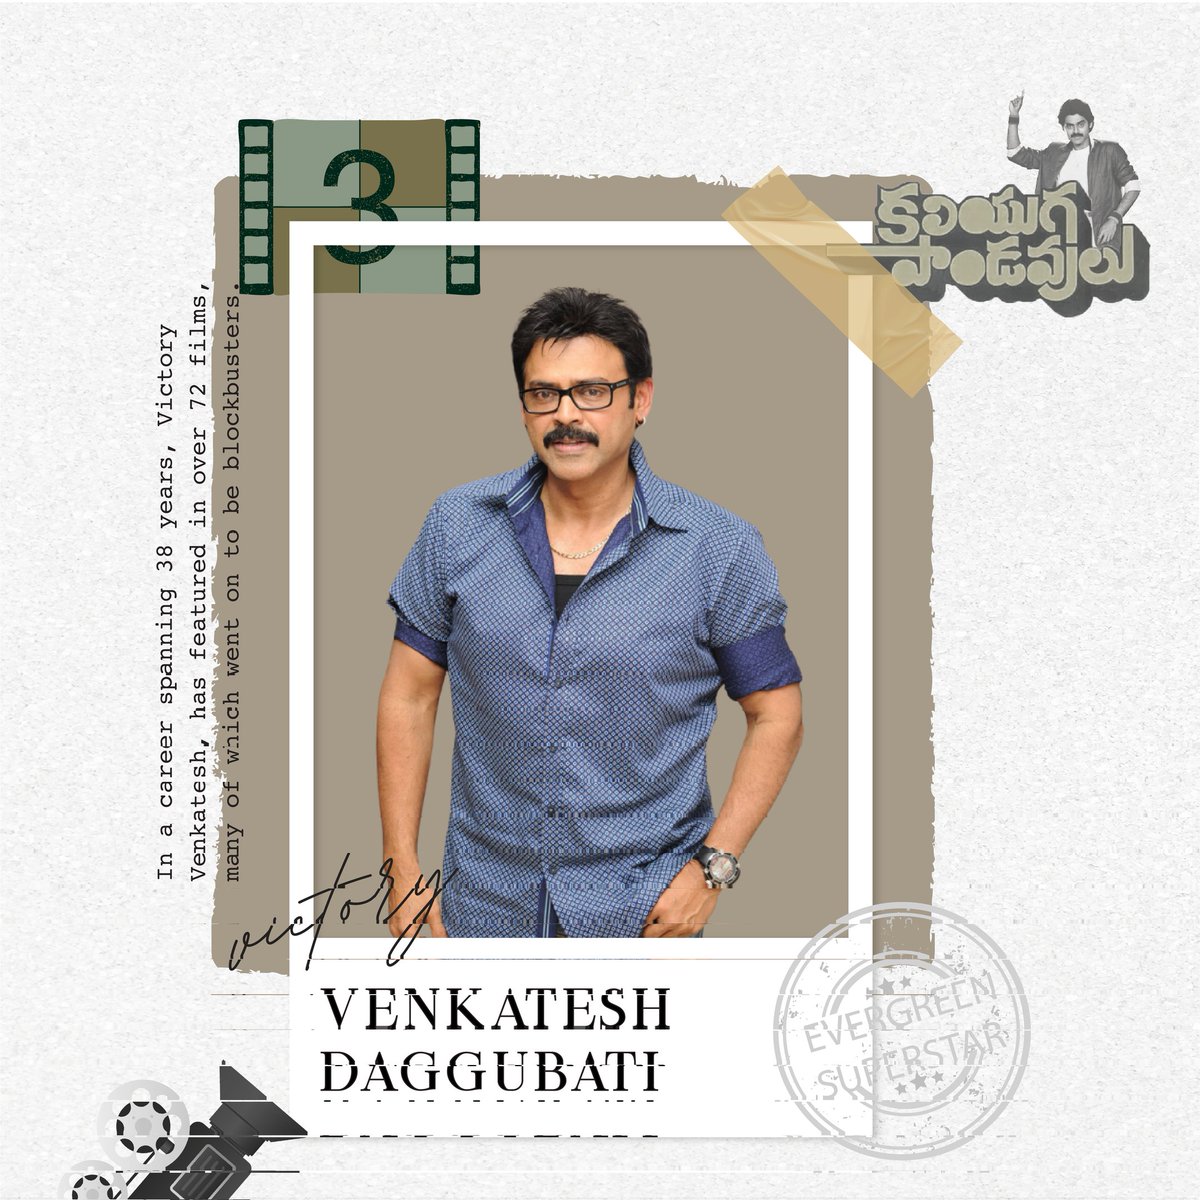 The timeless legend, our very own Victory Venkatesh’s charm continues to captivate hearts, both on and off the screen. @VenkyMama #Southbay #SouthbayTalent #VictoryVenkatesh #Indiancinema #Indianactor